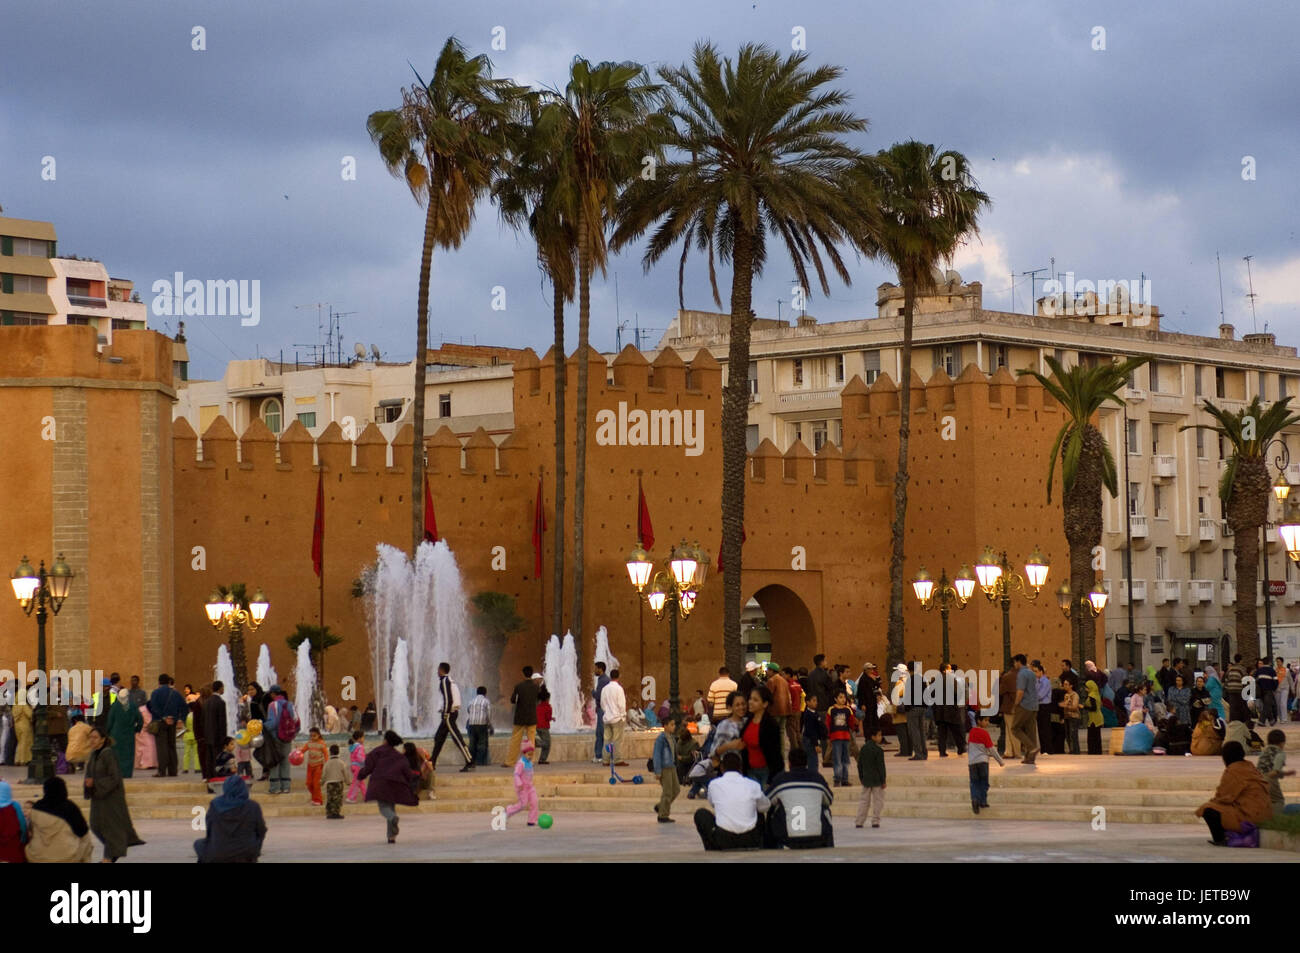 Morocco, Rabat, city wall, square, person, Africa, North Africa, town, part of town, Medina, defensive wall, architecture, flags, palms, lanterns, locals, tourists, men, women, children, leisure time, outside, culture, Stock Photo